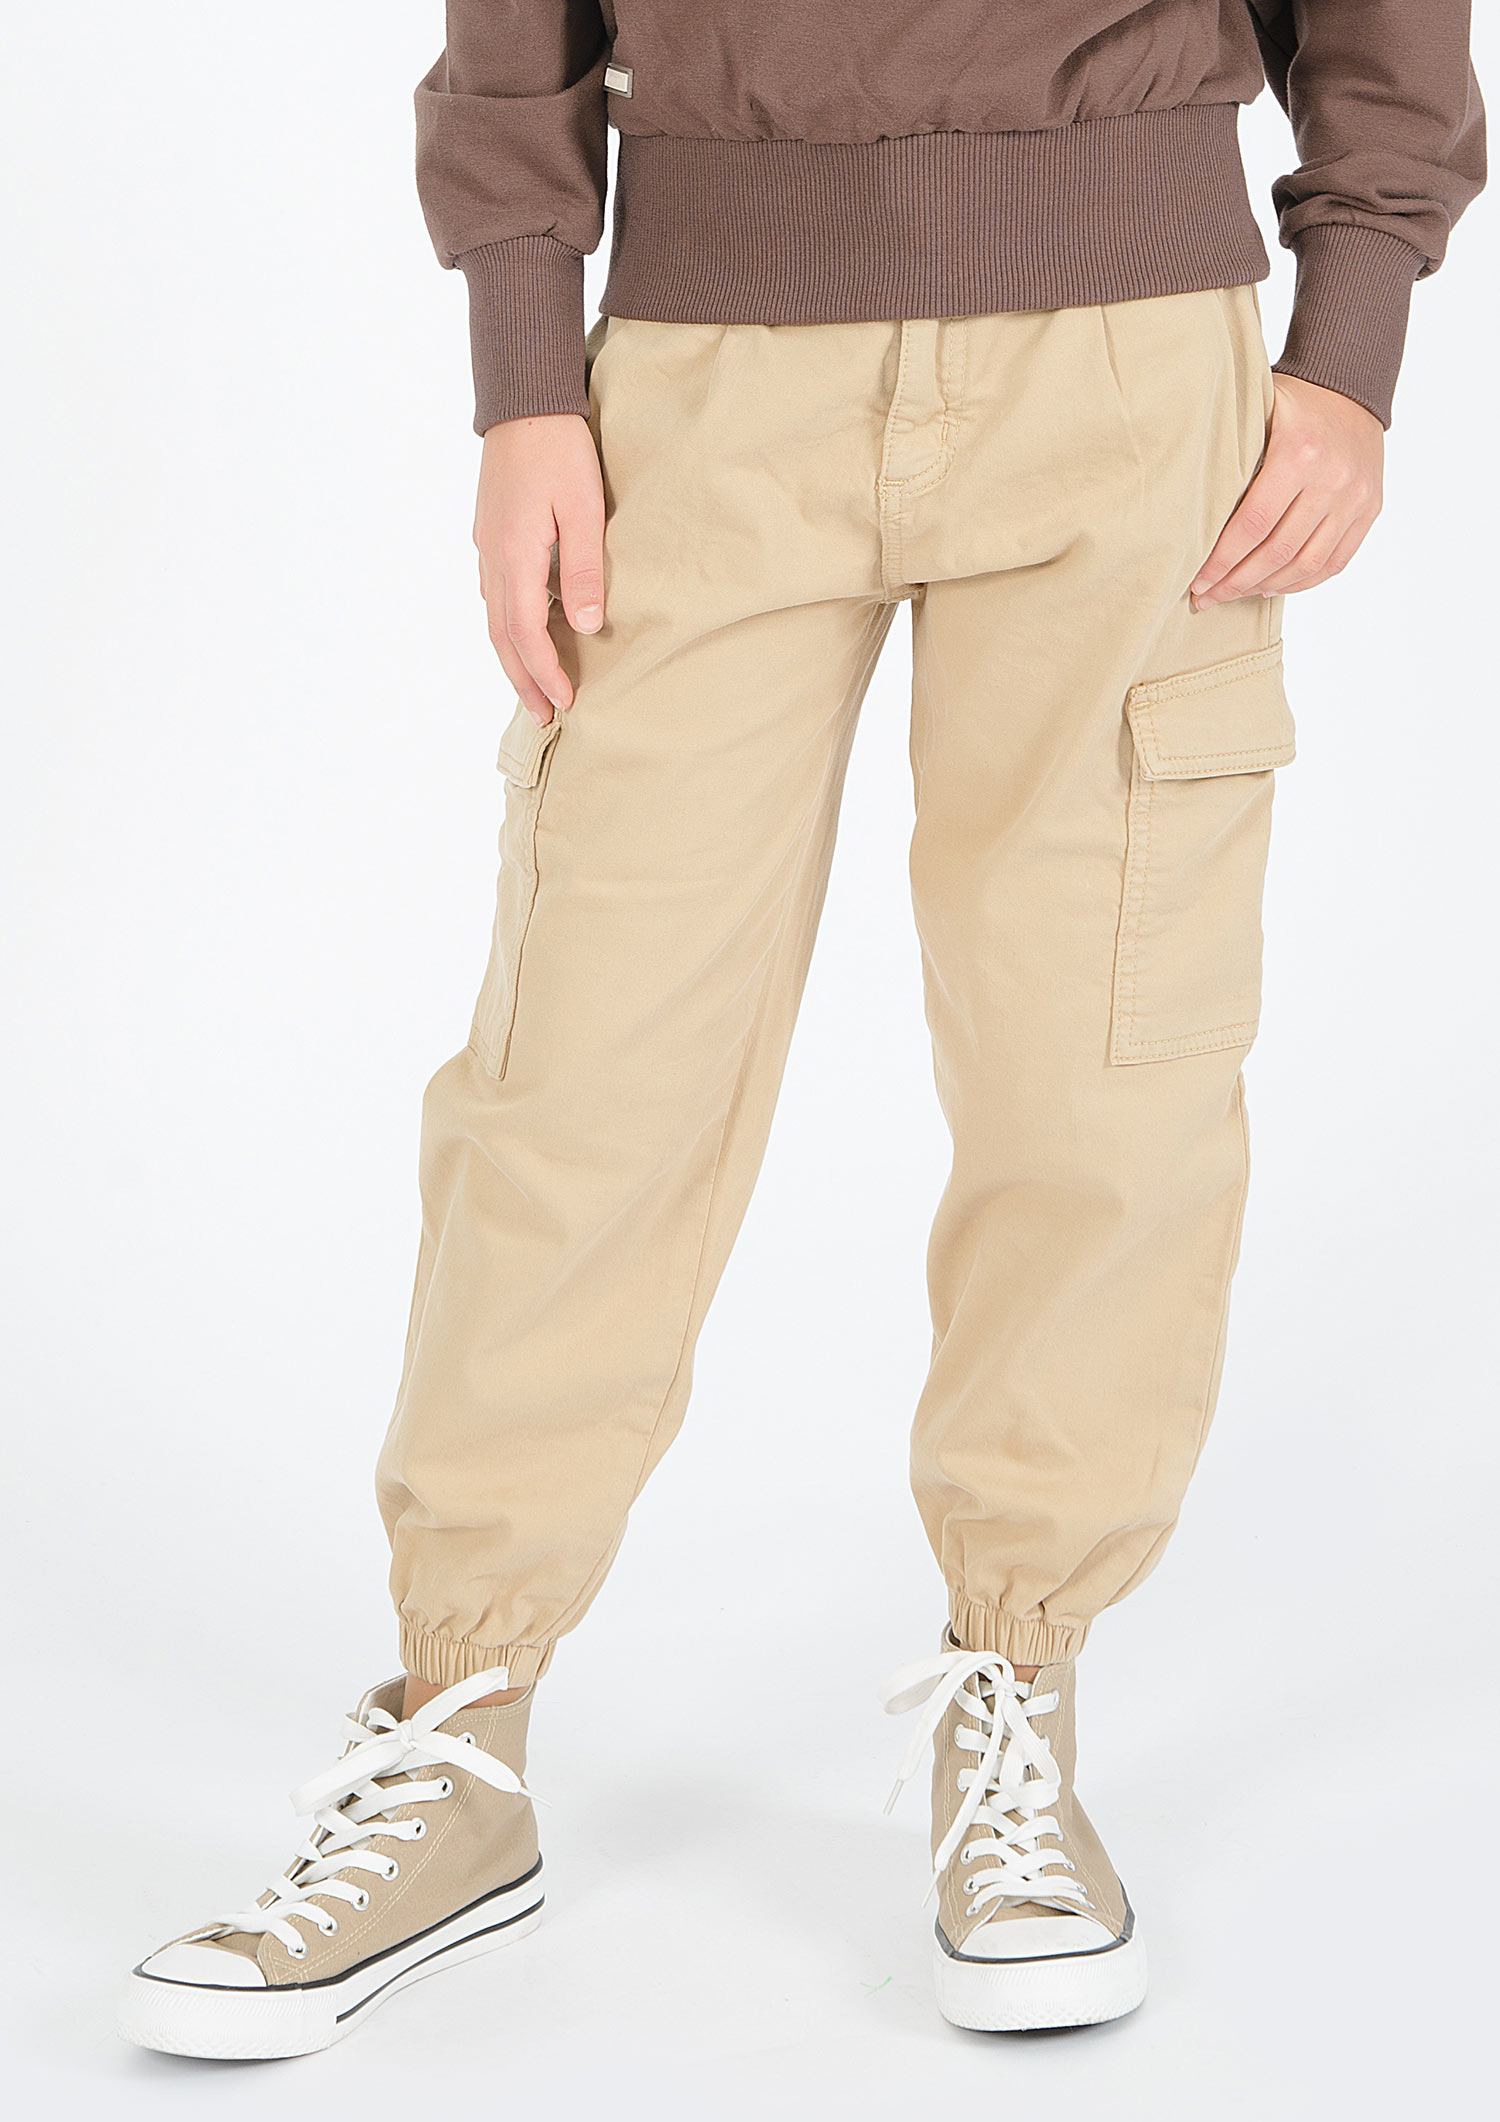 1334-Girls Super Balloon Pant Cargo, Cropped, available in Normal